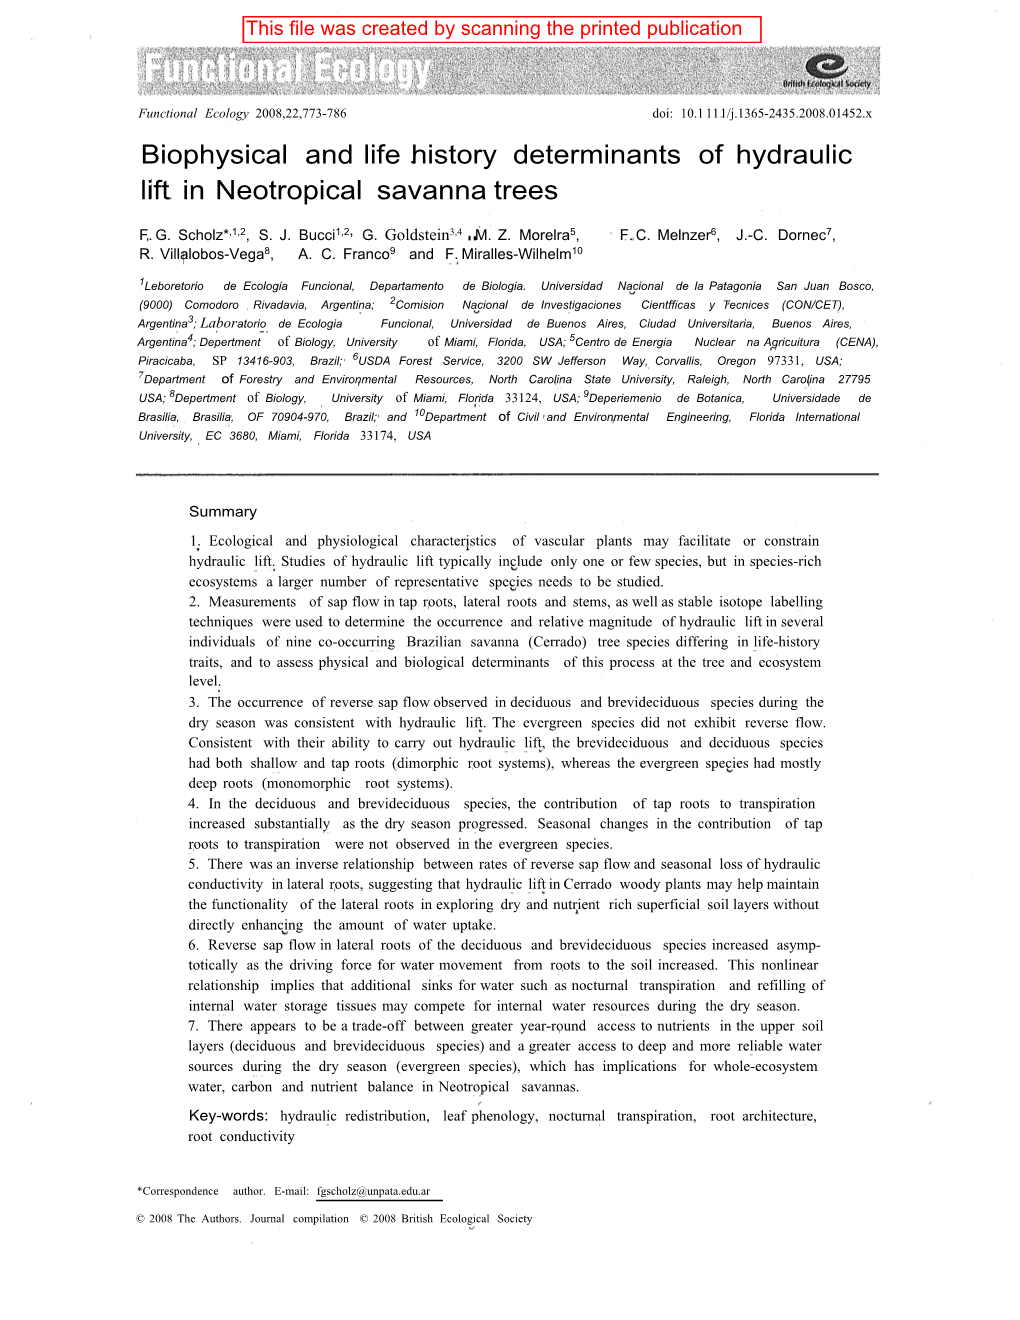 Biophysical and Life .History Determinants of Hydraulic Lift in Neotropical Savanna Trees